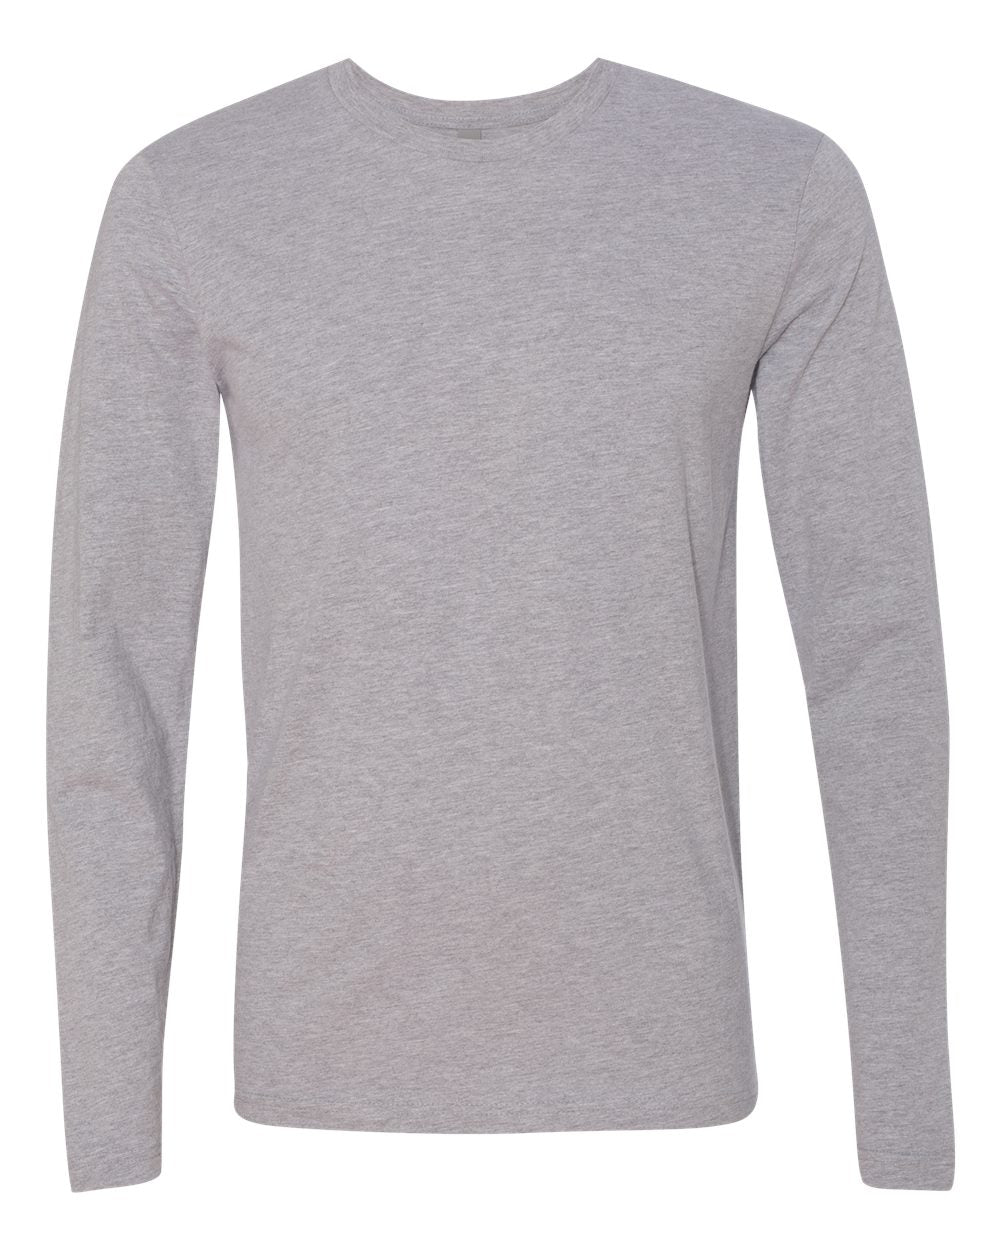 Next Level Long Sleeve (3601) in Heather Grey